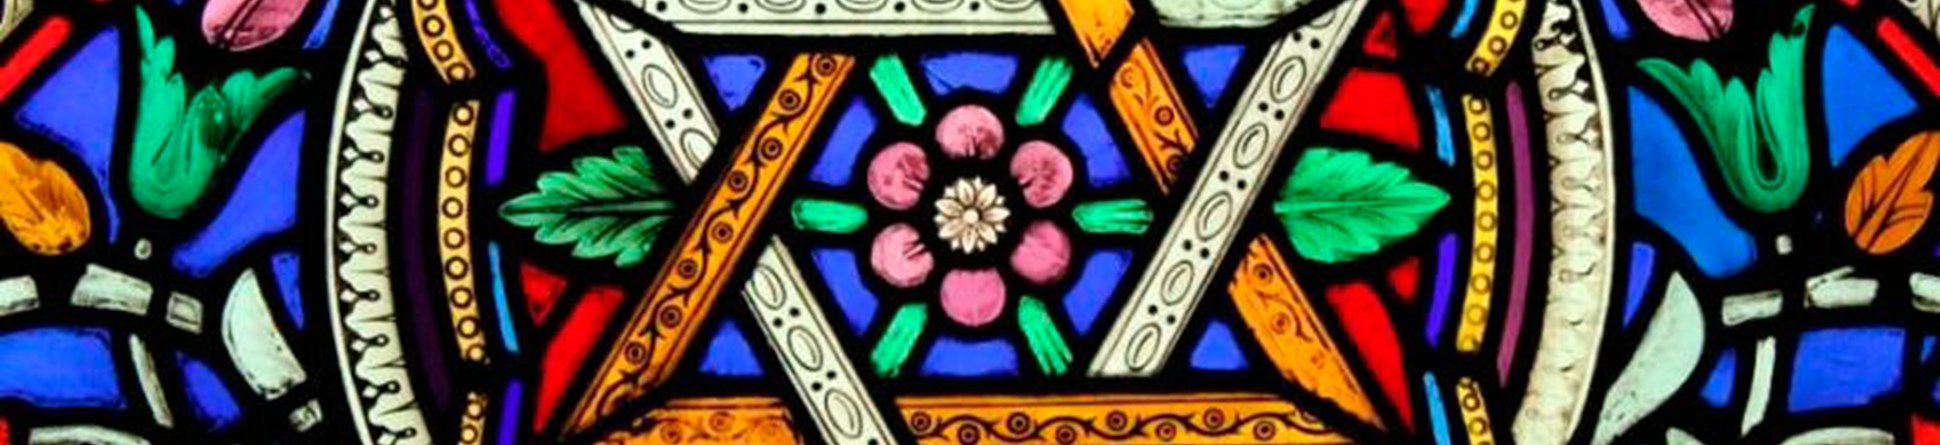 Stained glass window of a star shaped pattern with a flower in the centre and around the edges.